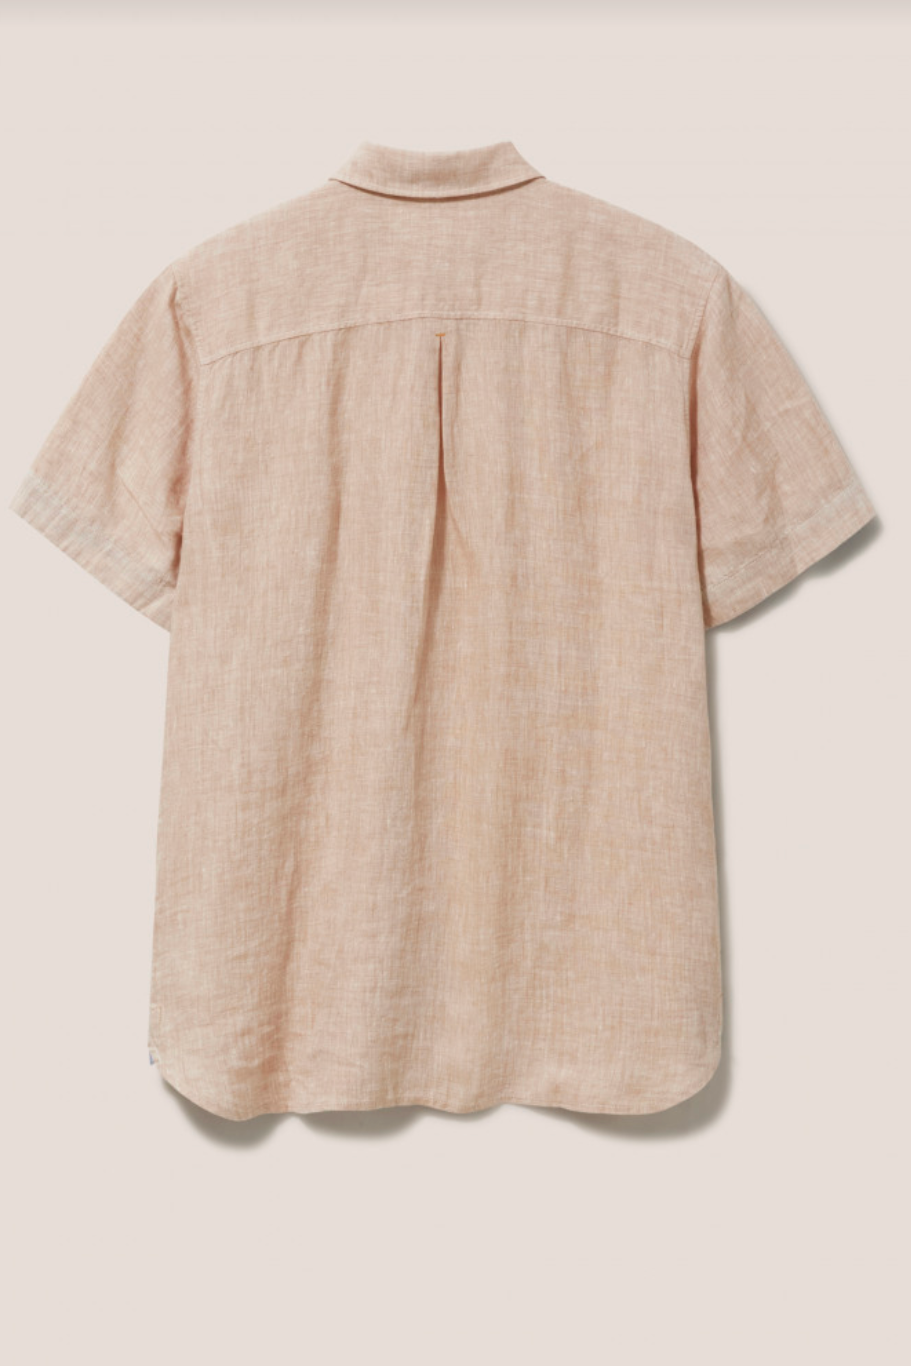 White Stuff Pembroke Short Sleeve Linen Shirt in Dus Pink-Mens-Ohh! By Gum - Shop Sustainable